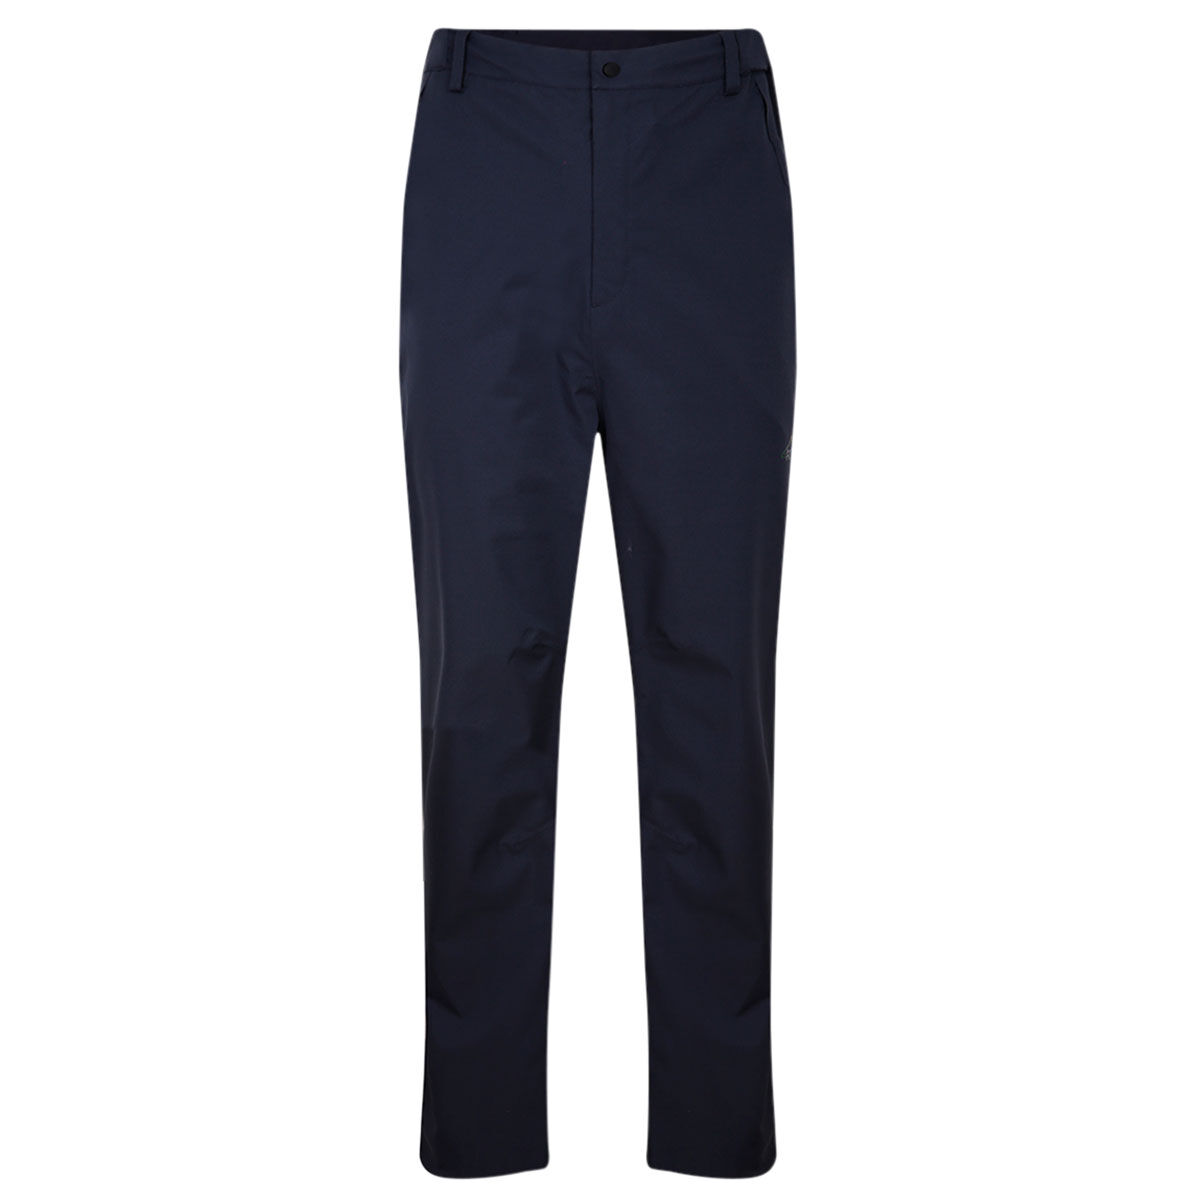 Crew Clothing Straight Fit Golf Chinos, Navy Blue at John Lewis & Partners